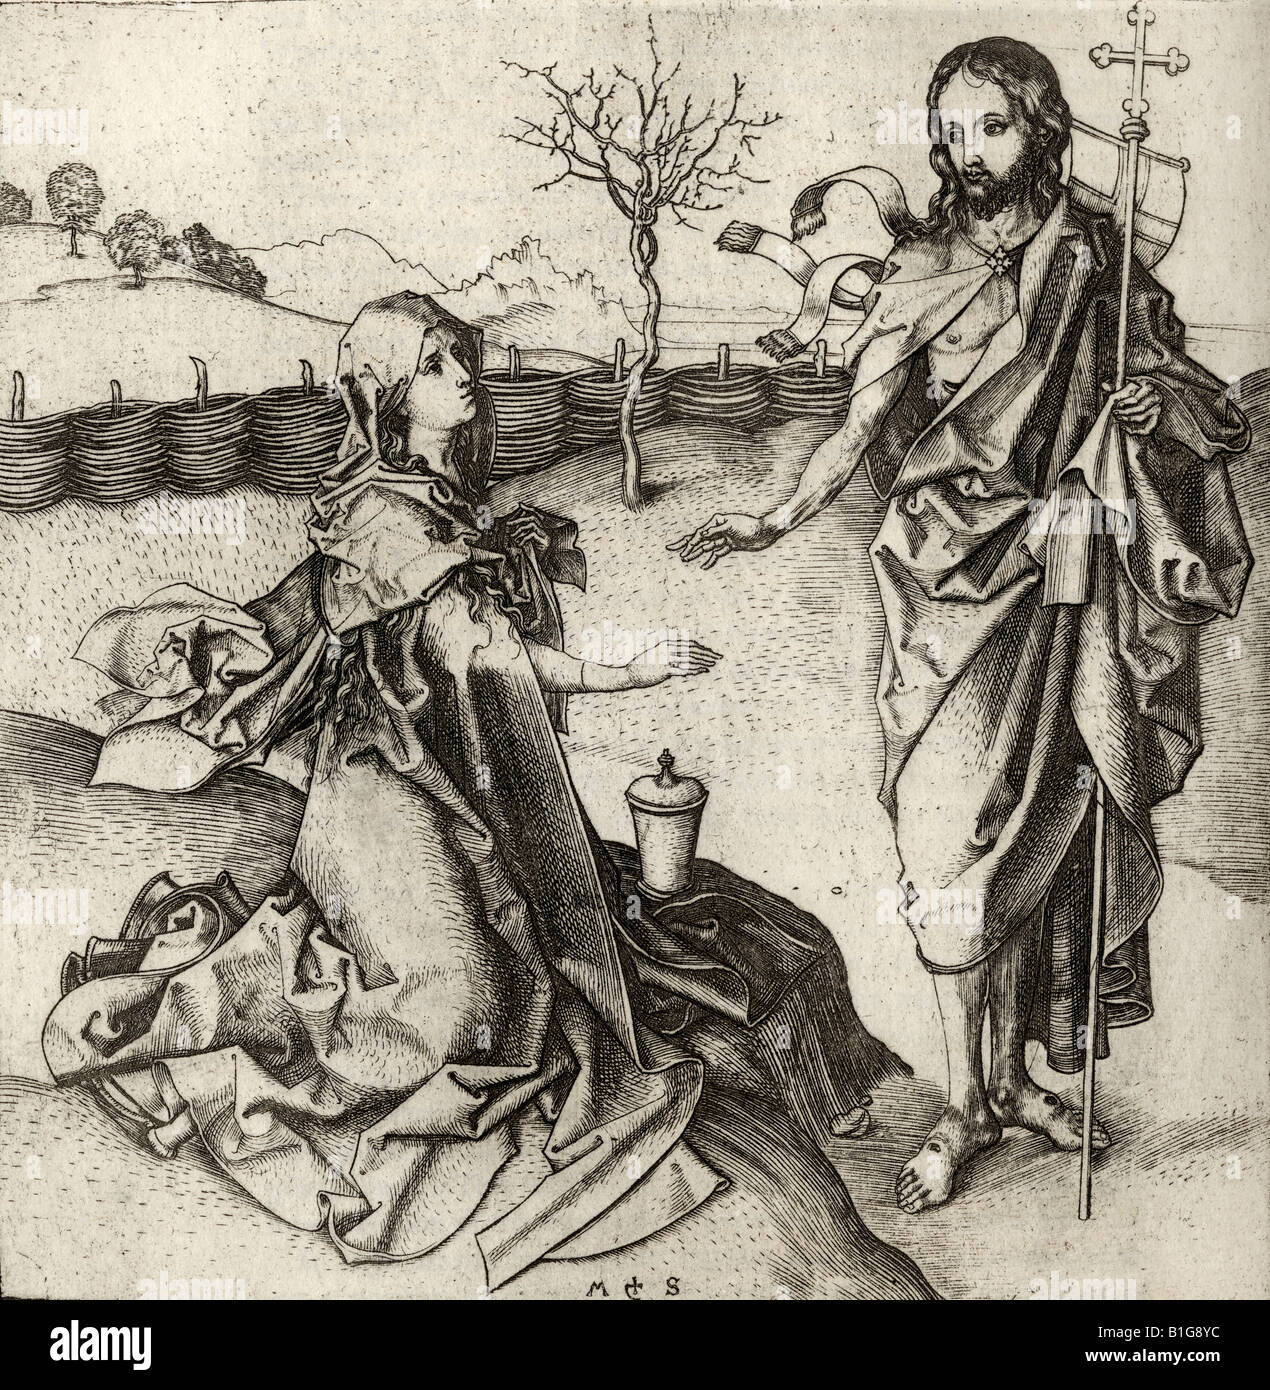 Facsimile of Our Saviour appearing to Mary Magdalene in the Garden, by Martin Schongauer, c.1420 - 1488. German painter and engraver. Stock Photo